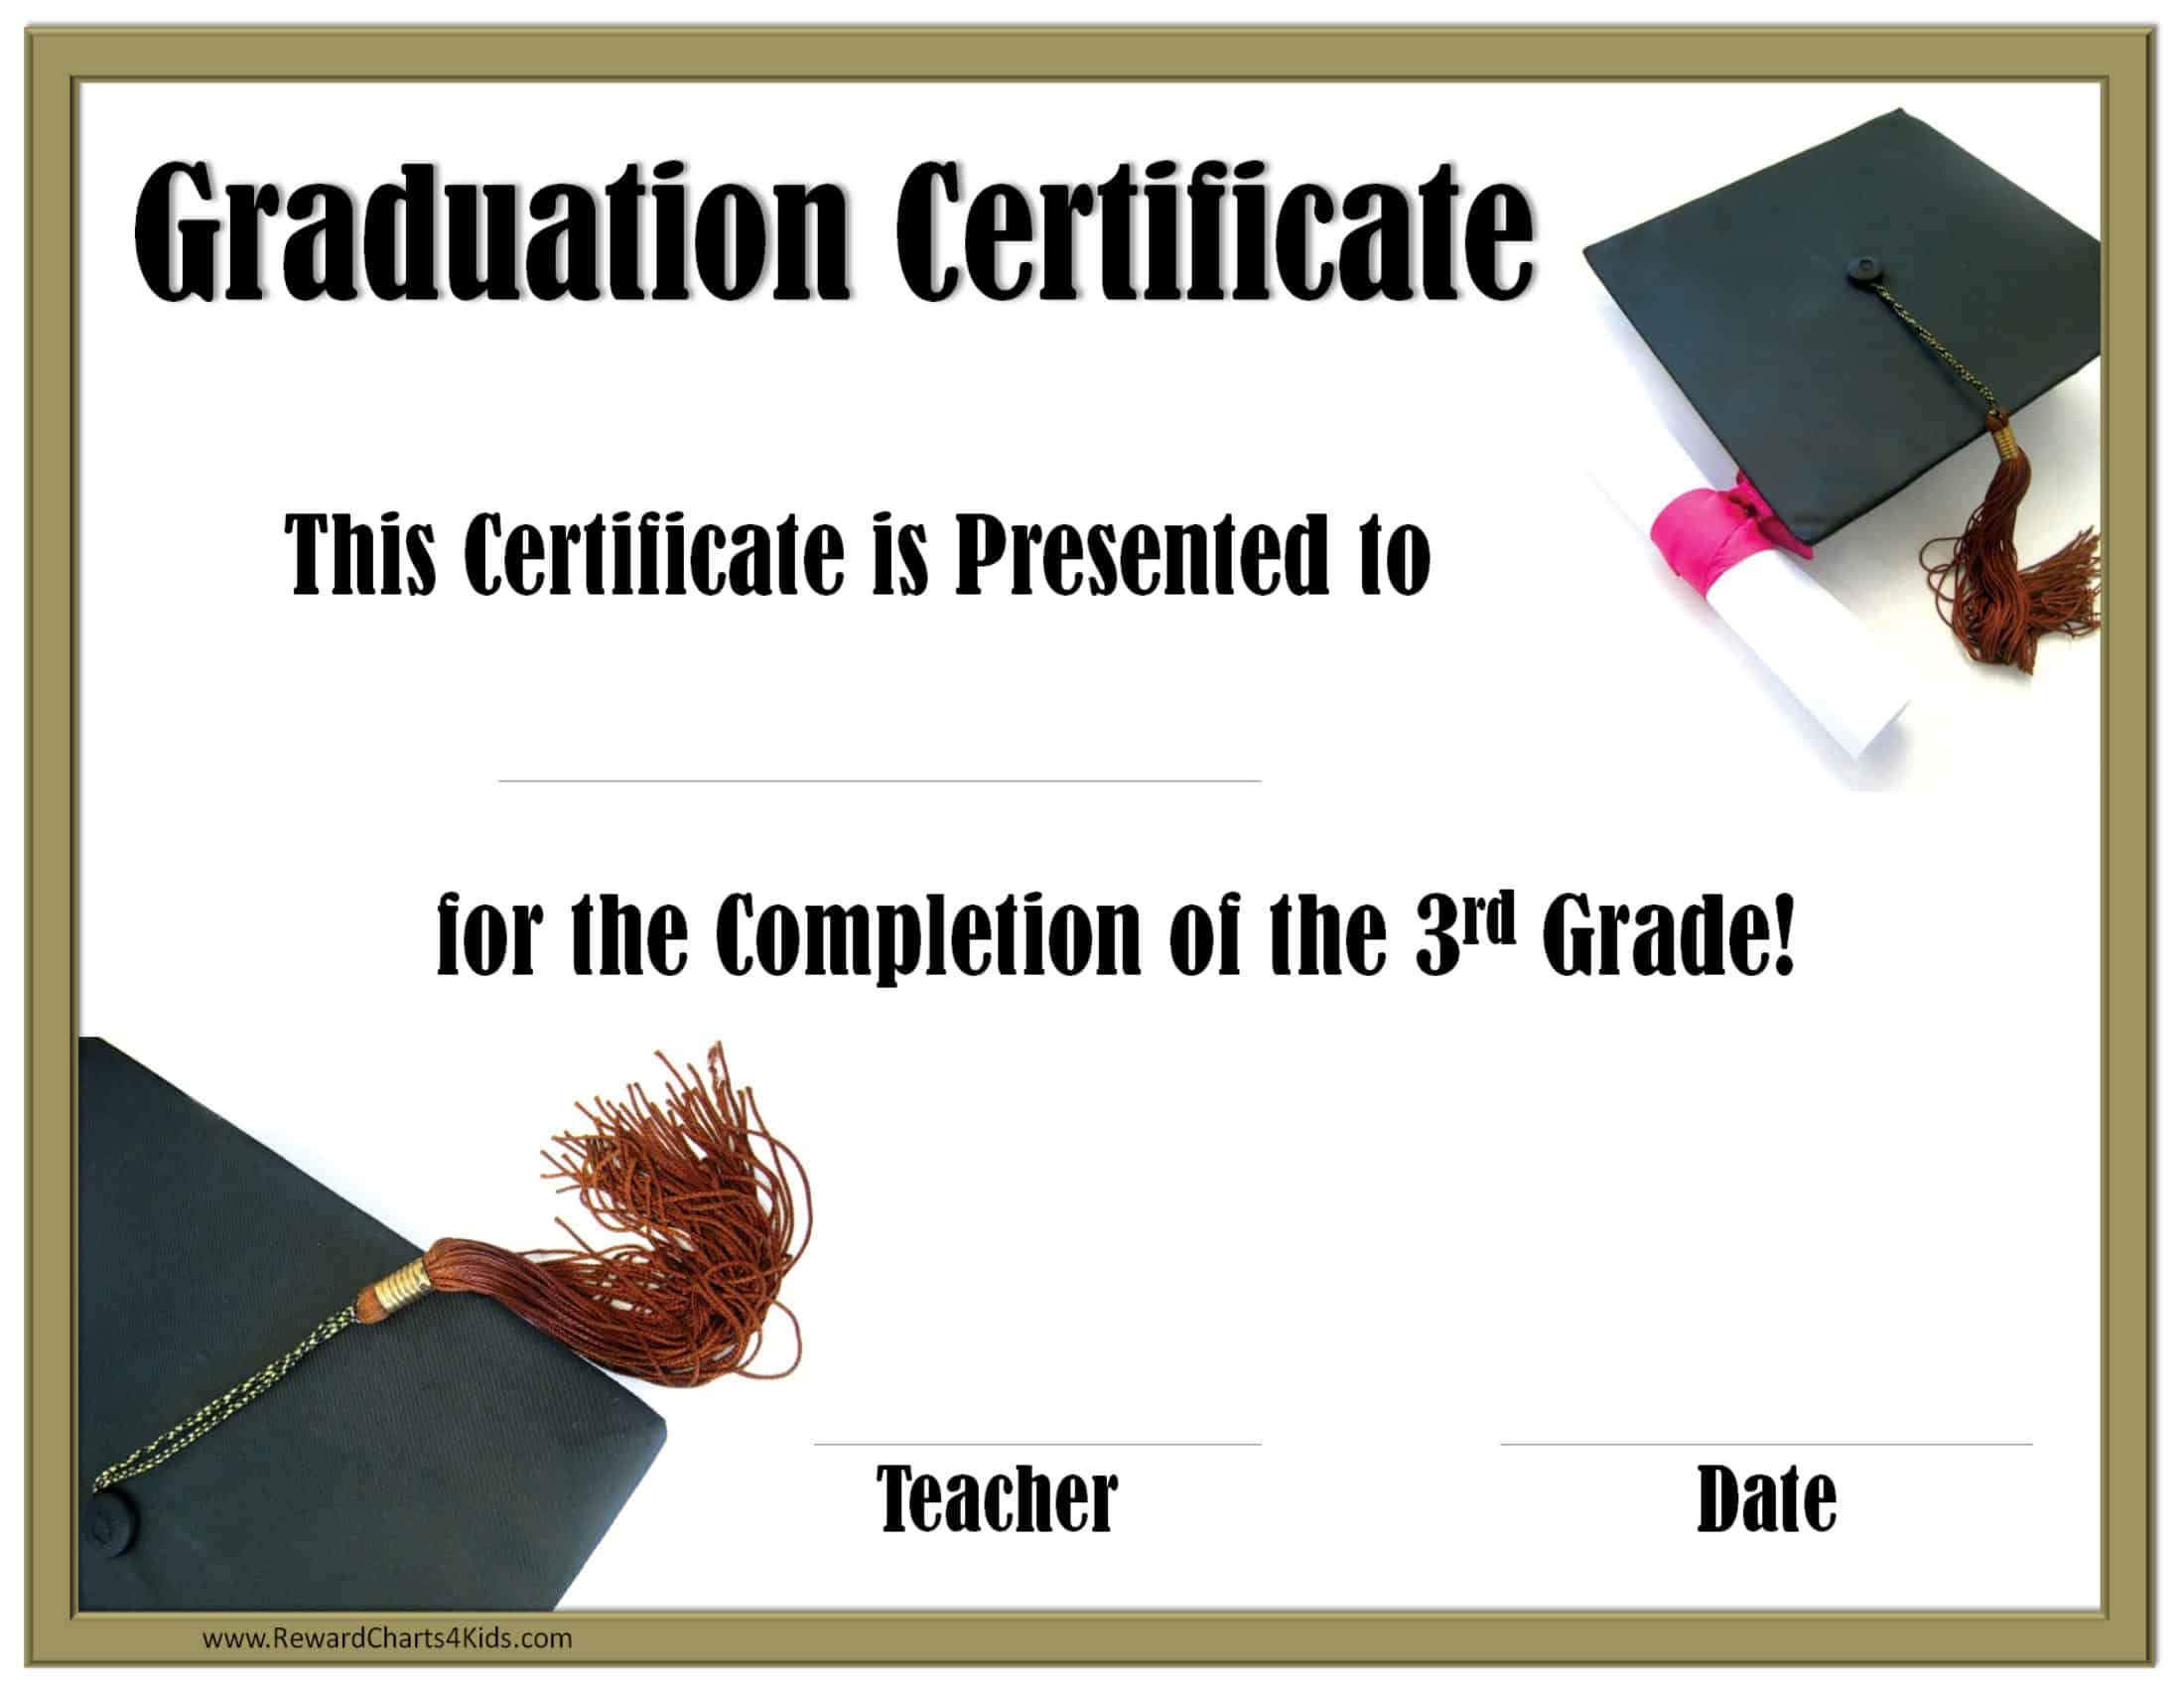 school-graduation-certificates-customize-online-with-or-without-a-photo